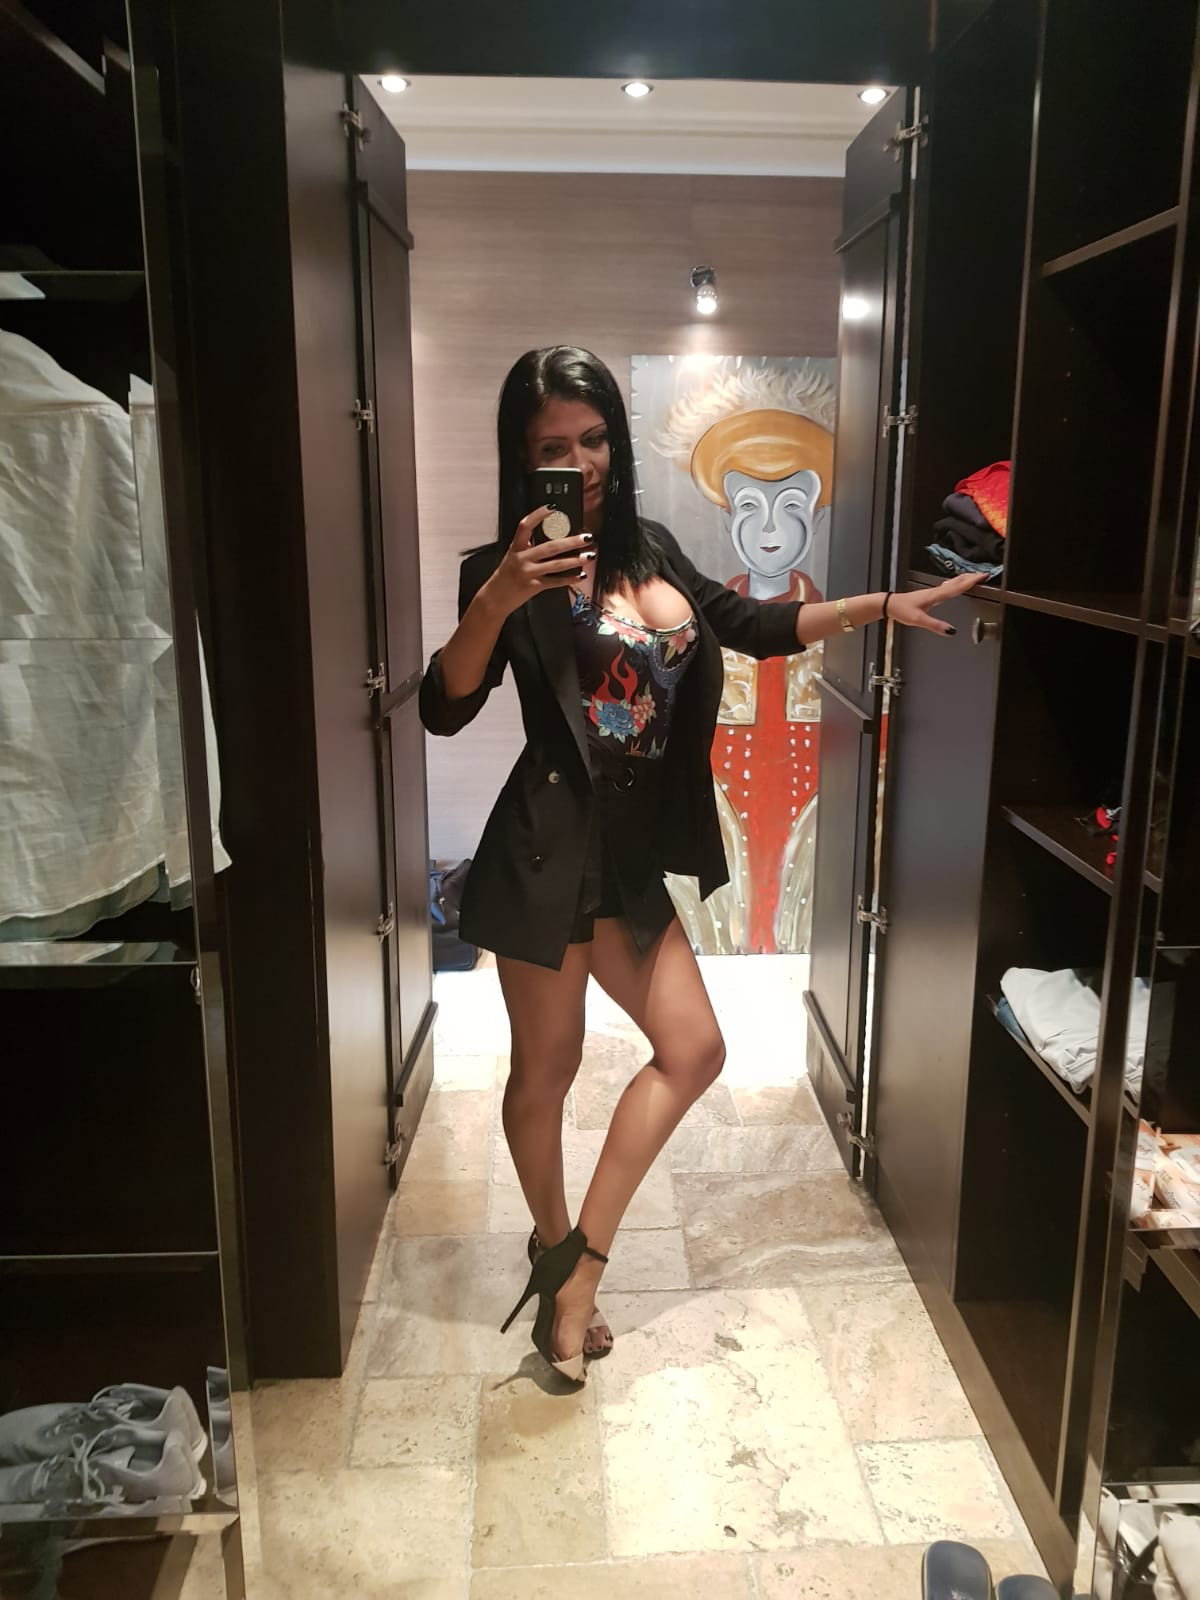 Watch the Photo by AliciaBonita with the username @AliciaBonita, who is a star user, posted on February 12, 2020 and the text says 'Missing the summmer . Don't you ?
#sharesomelove #beauty #goingout'